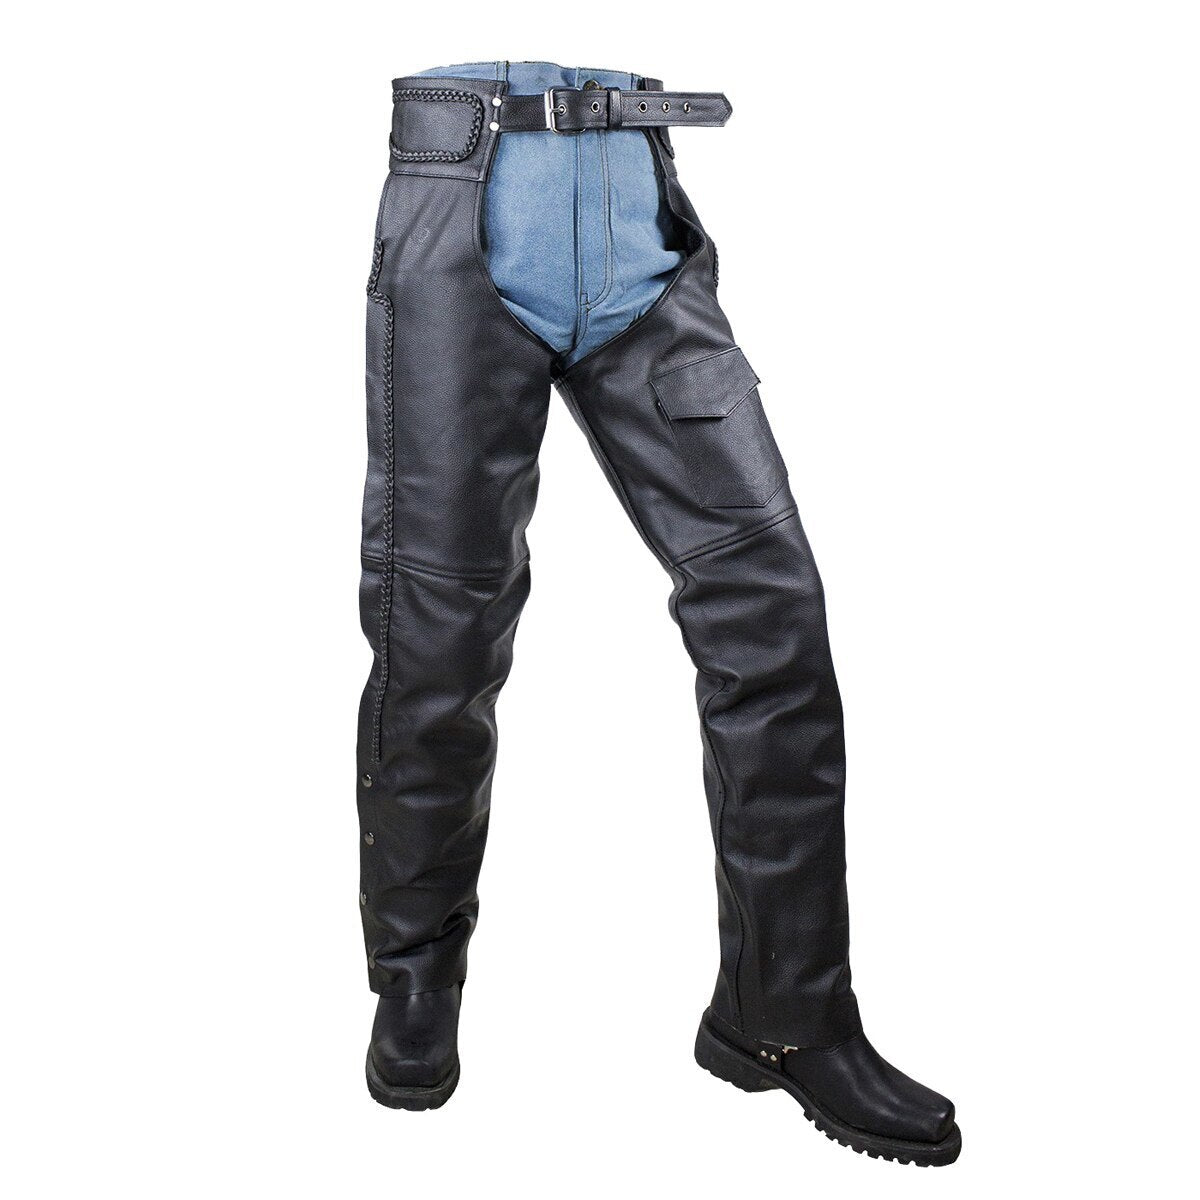 Vance Leather Basic Economy Leather Chaps with Braid Trim